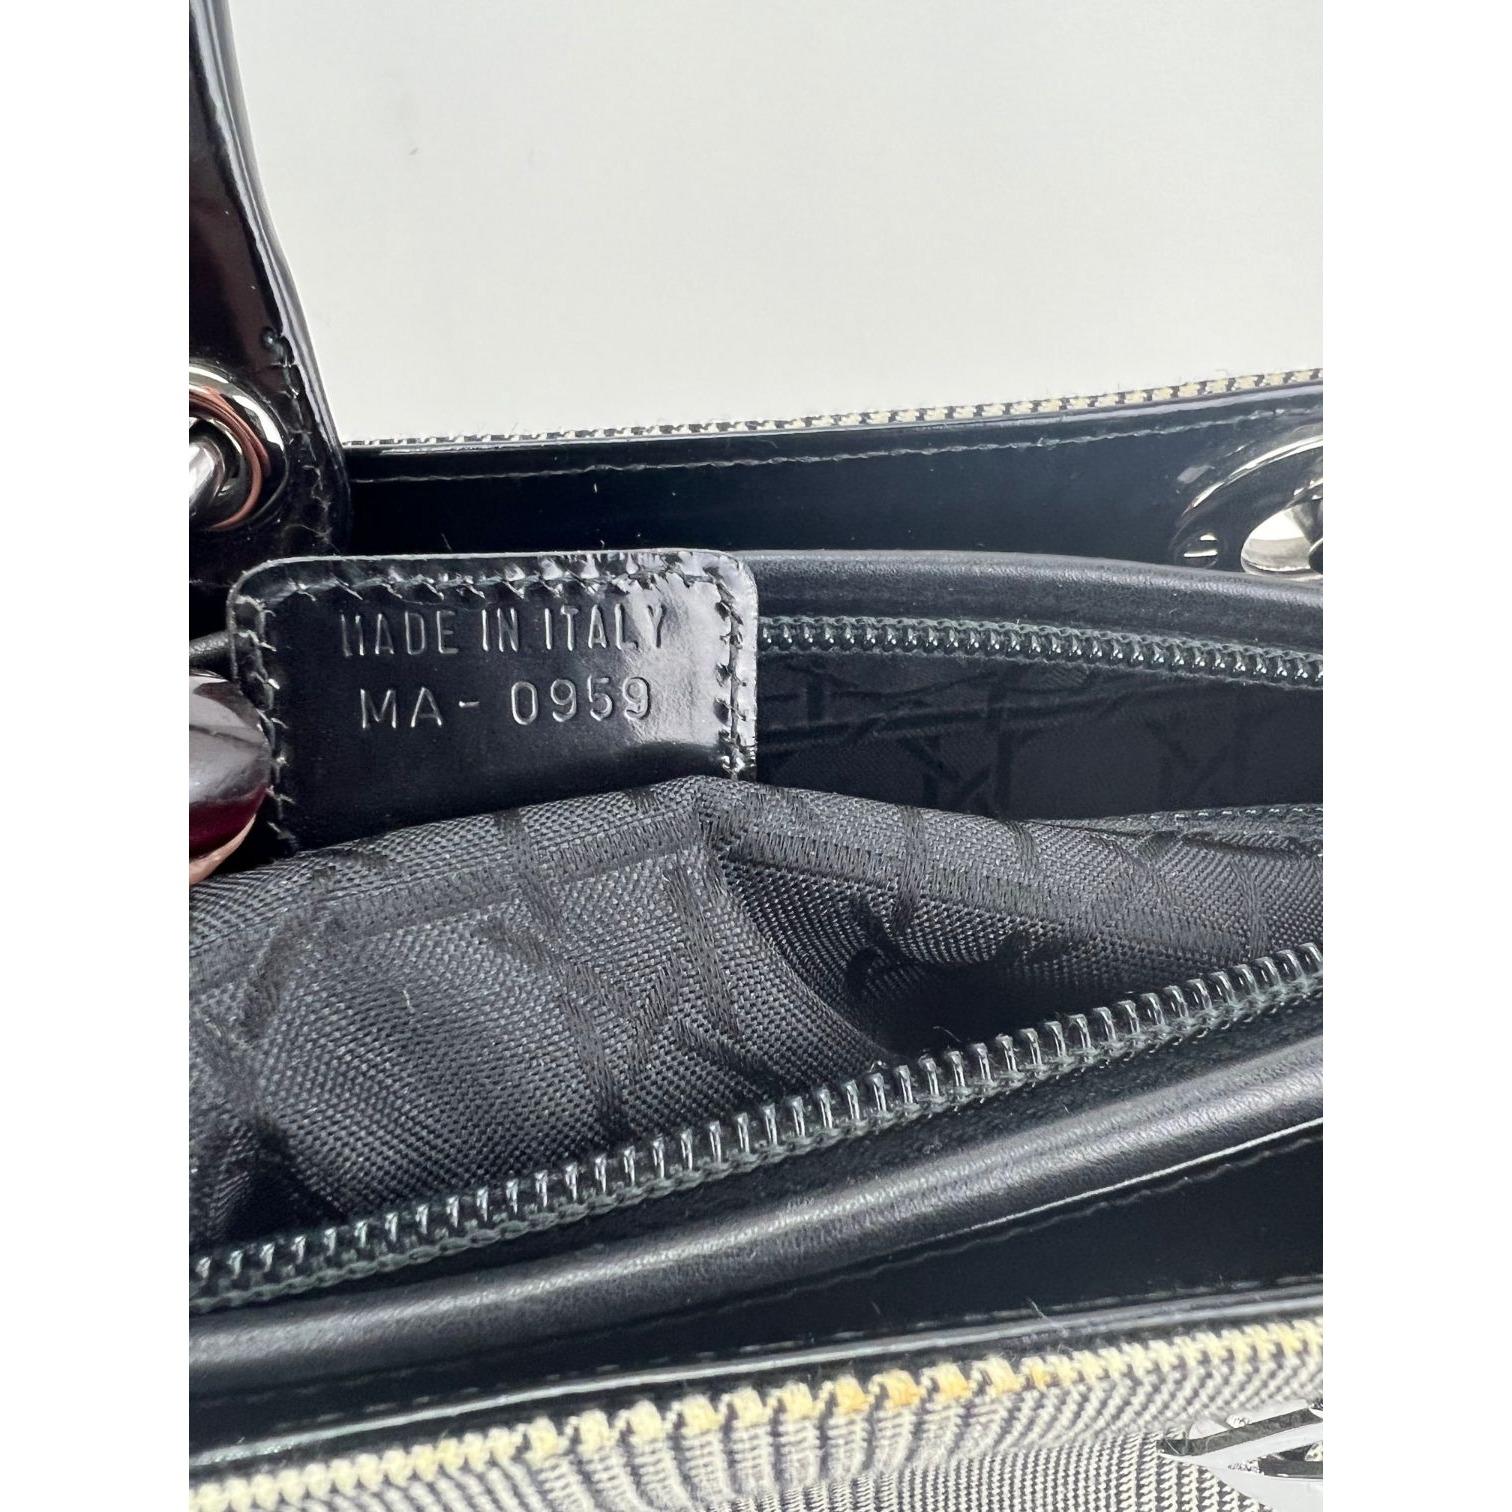 Pre-Owned 100% Authentic
CHRISTIAN DIOR Patent Canvas Large Lady Black
Shoulder Hand Bag
RATING: B...Very Good, well maintained,
shows minor signs of wear
MATERIAL: patent leather, canvas
STRAP: Removable Dior Black
Patent Leather Strap 35''